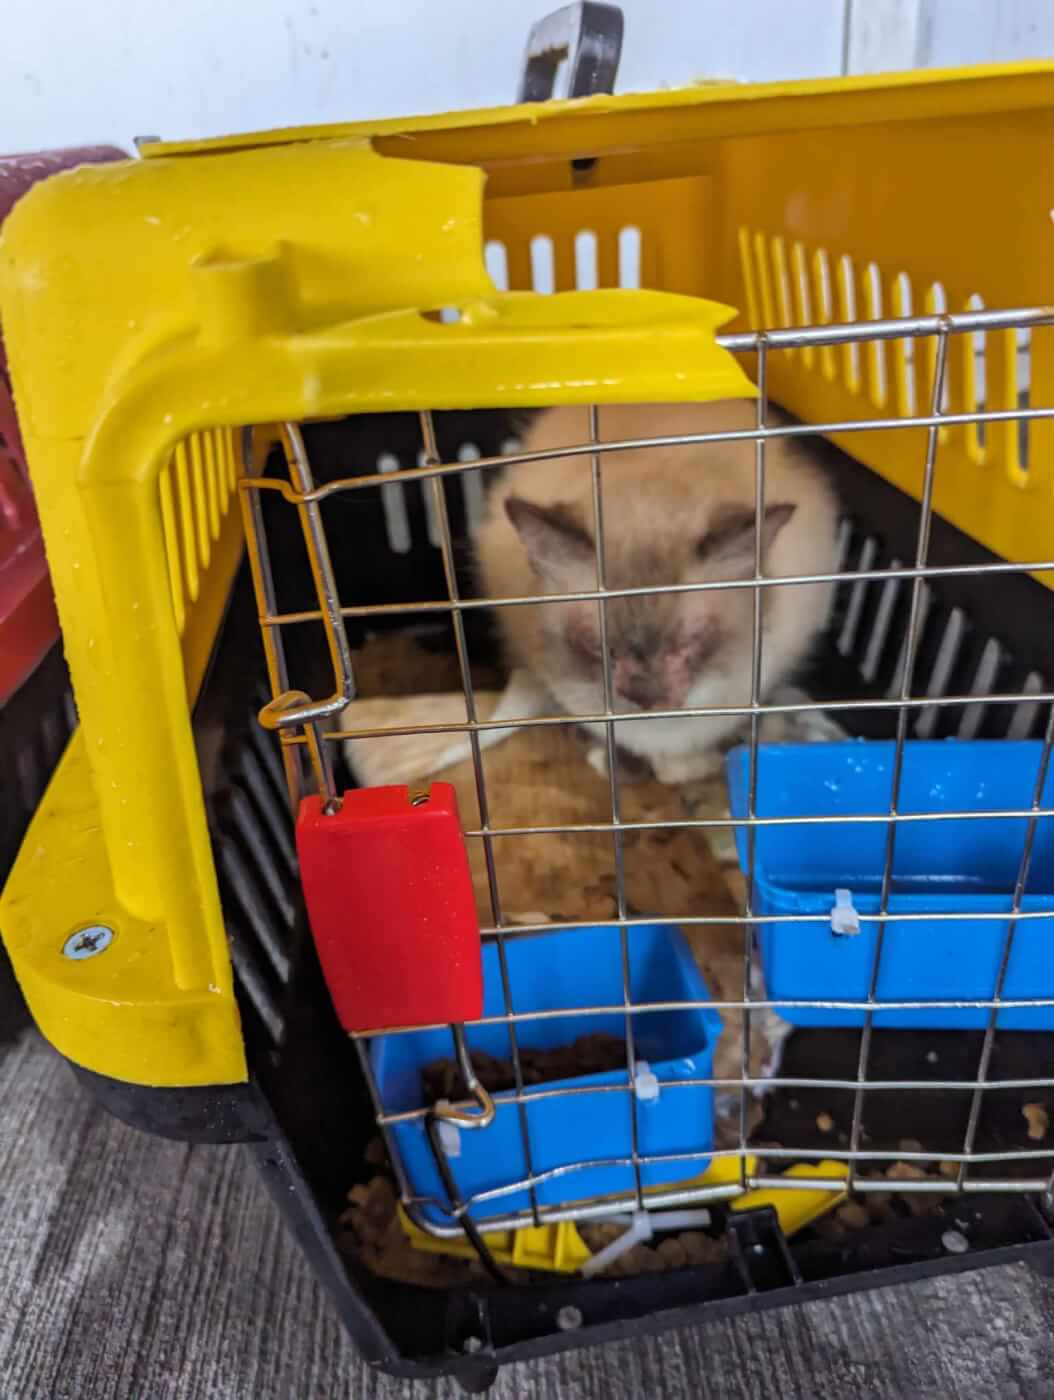 Destroyed yellow crate. A tan cat is sitting inside